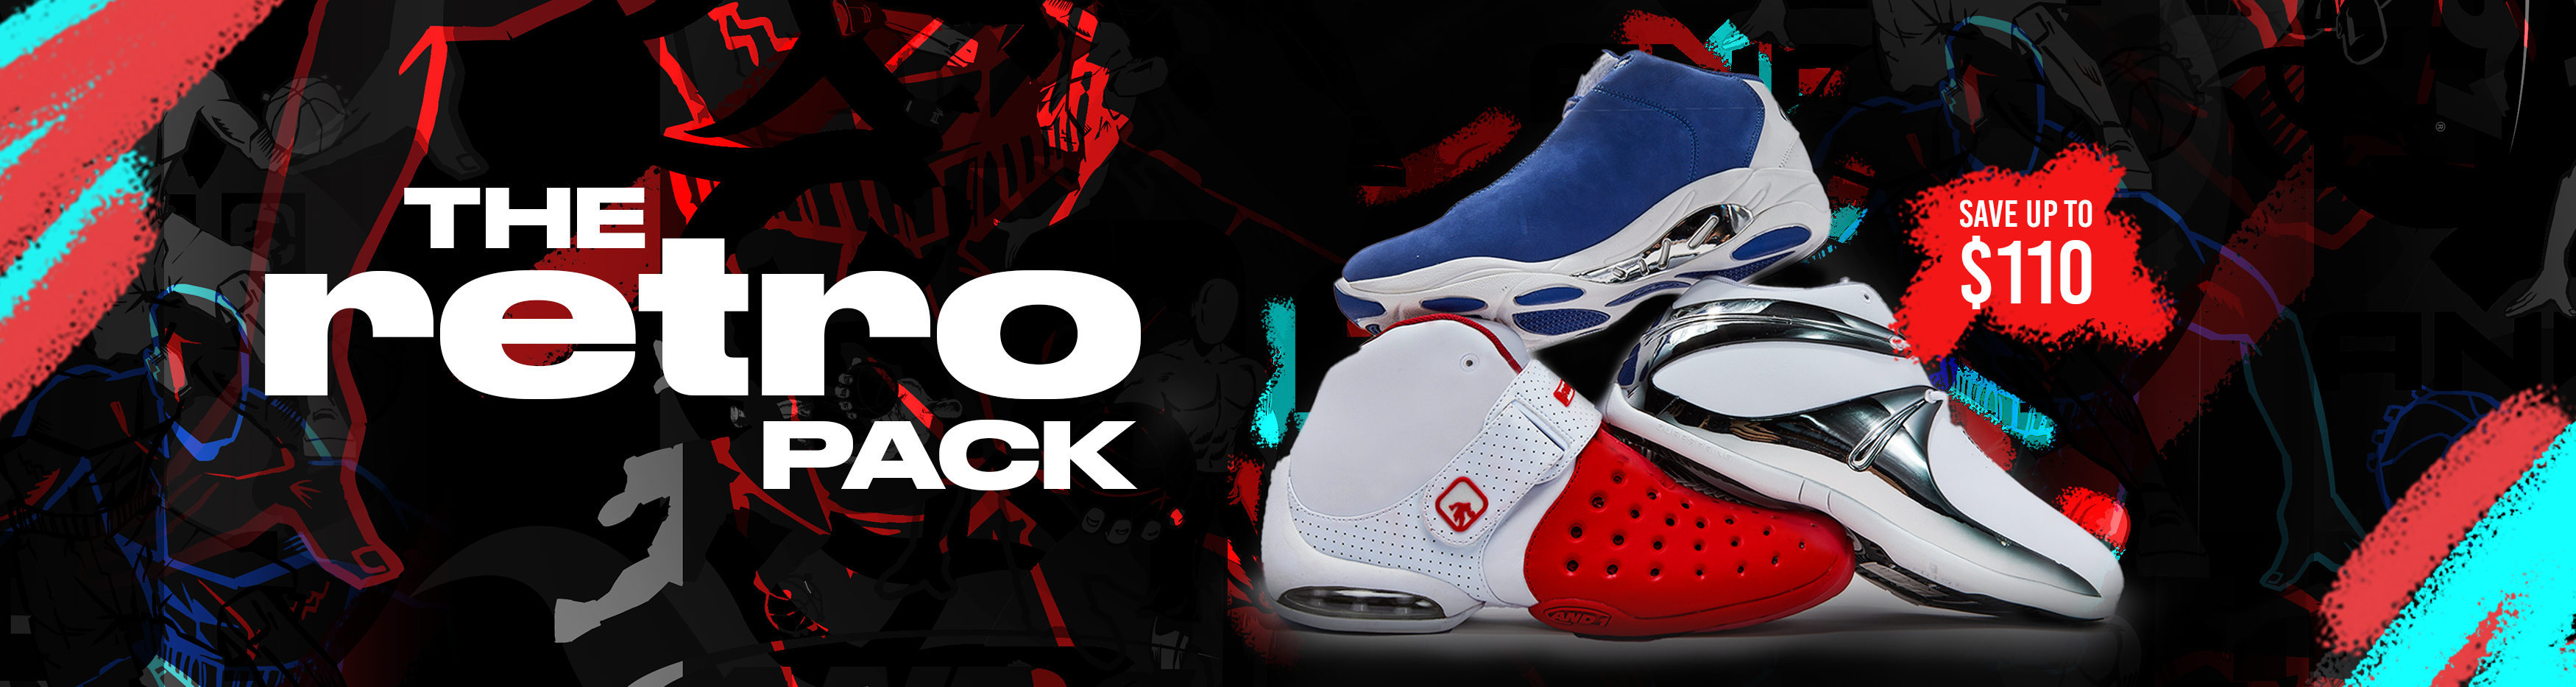 and1 retro pack deal limited time offer basketball shoes